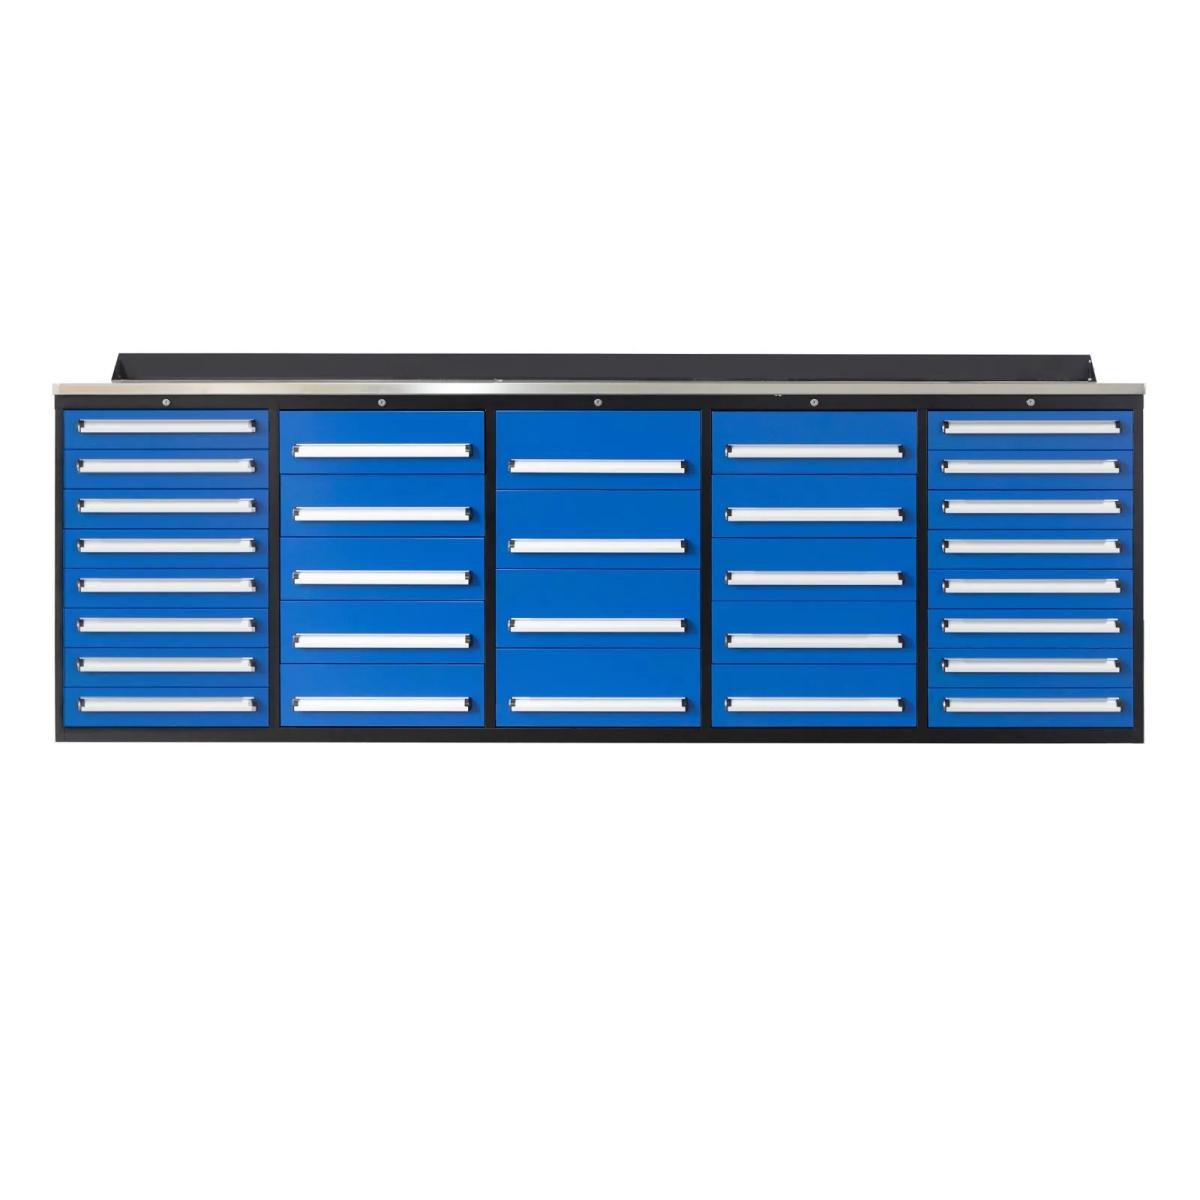 Value Industrial 10FT-30D Workbench Cabinets - 10 foot wide - 30 drawers